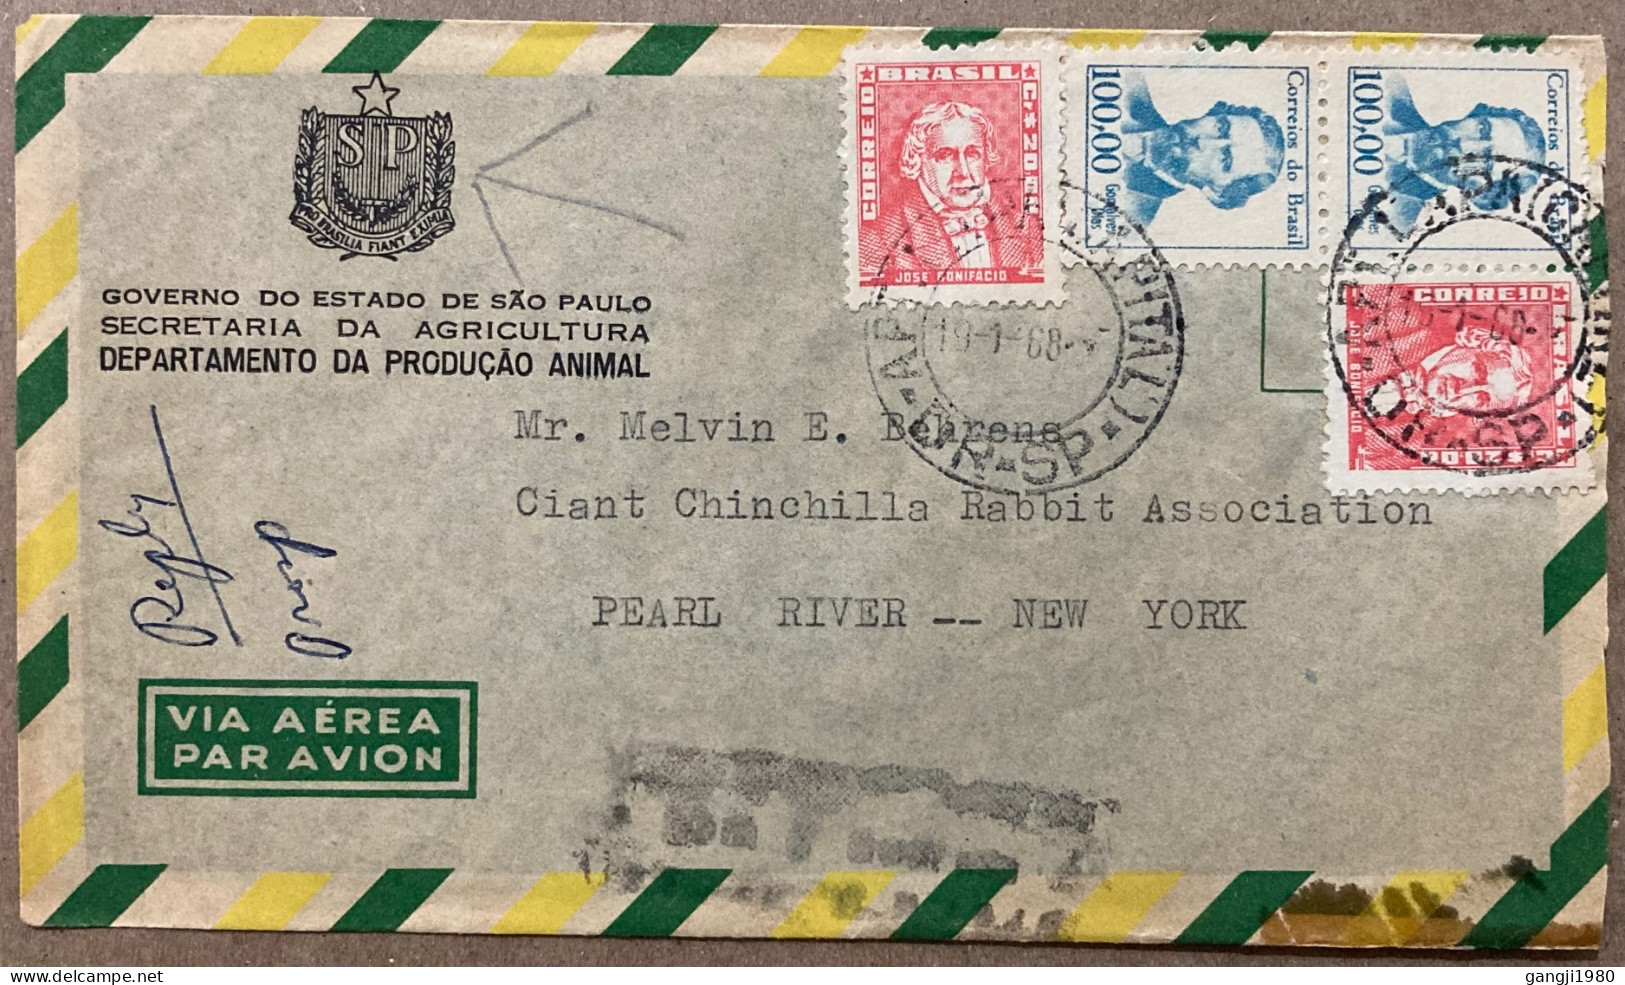 BRAZIL1968, COVER USED TO USA, ADVERTISING COVER, AGRICULTURE MINISTRY, ANIMAL & RABBIT BREEDER, IMPORT- EXPORT, ENCLOSE - Briefe U. Dokumente